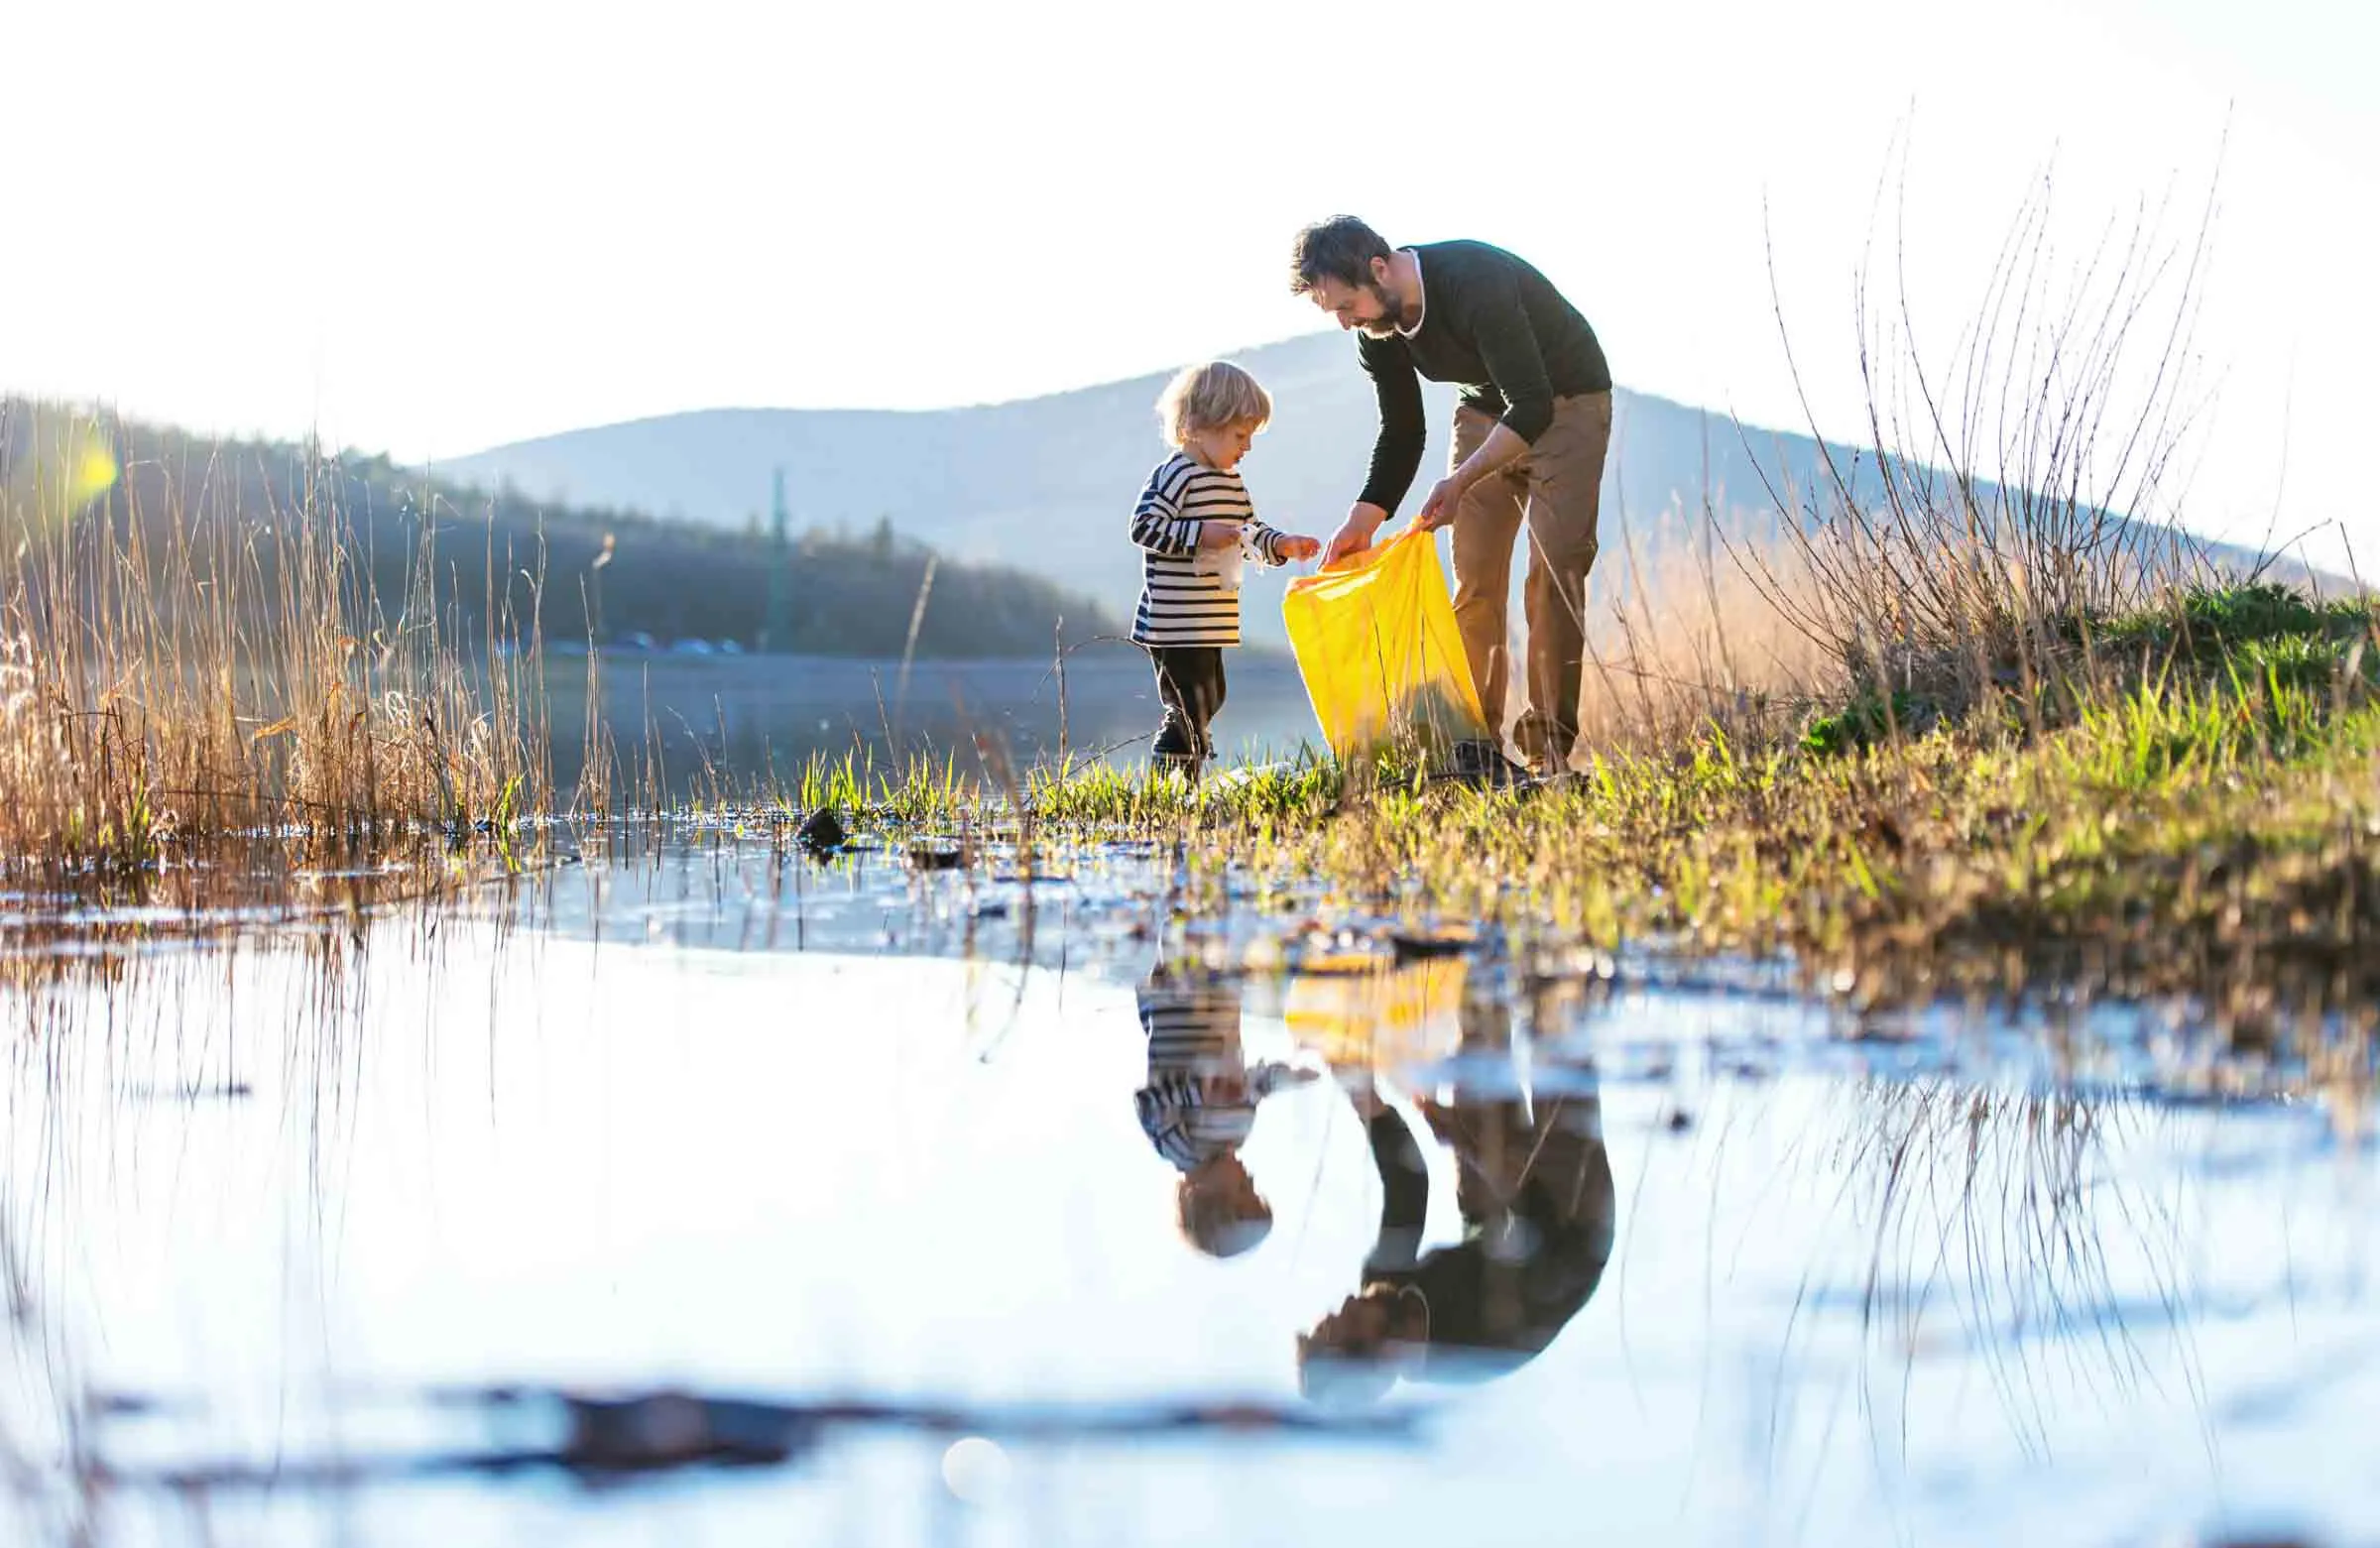 An adult and a child, stood on the bank of a lake, as the adult holds open a yellow bin bag and the child puts something inside it.